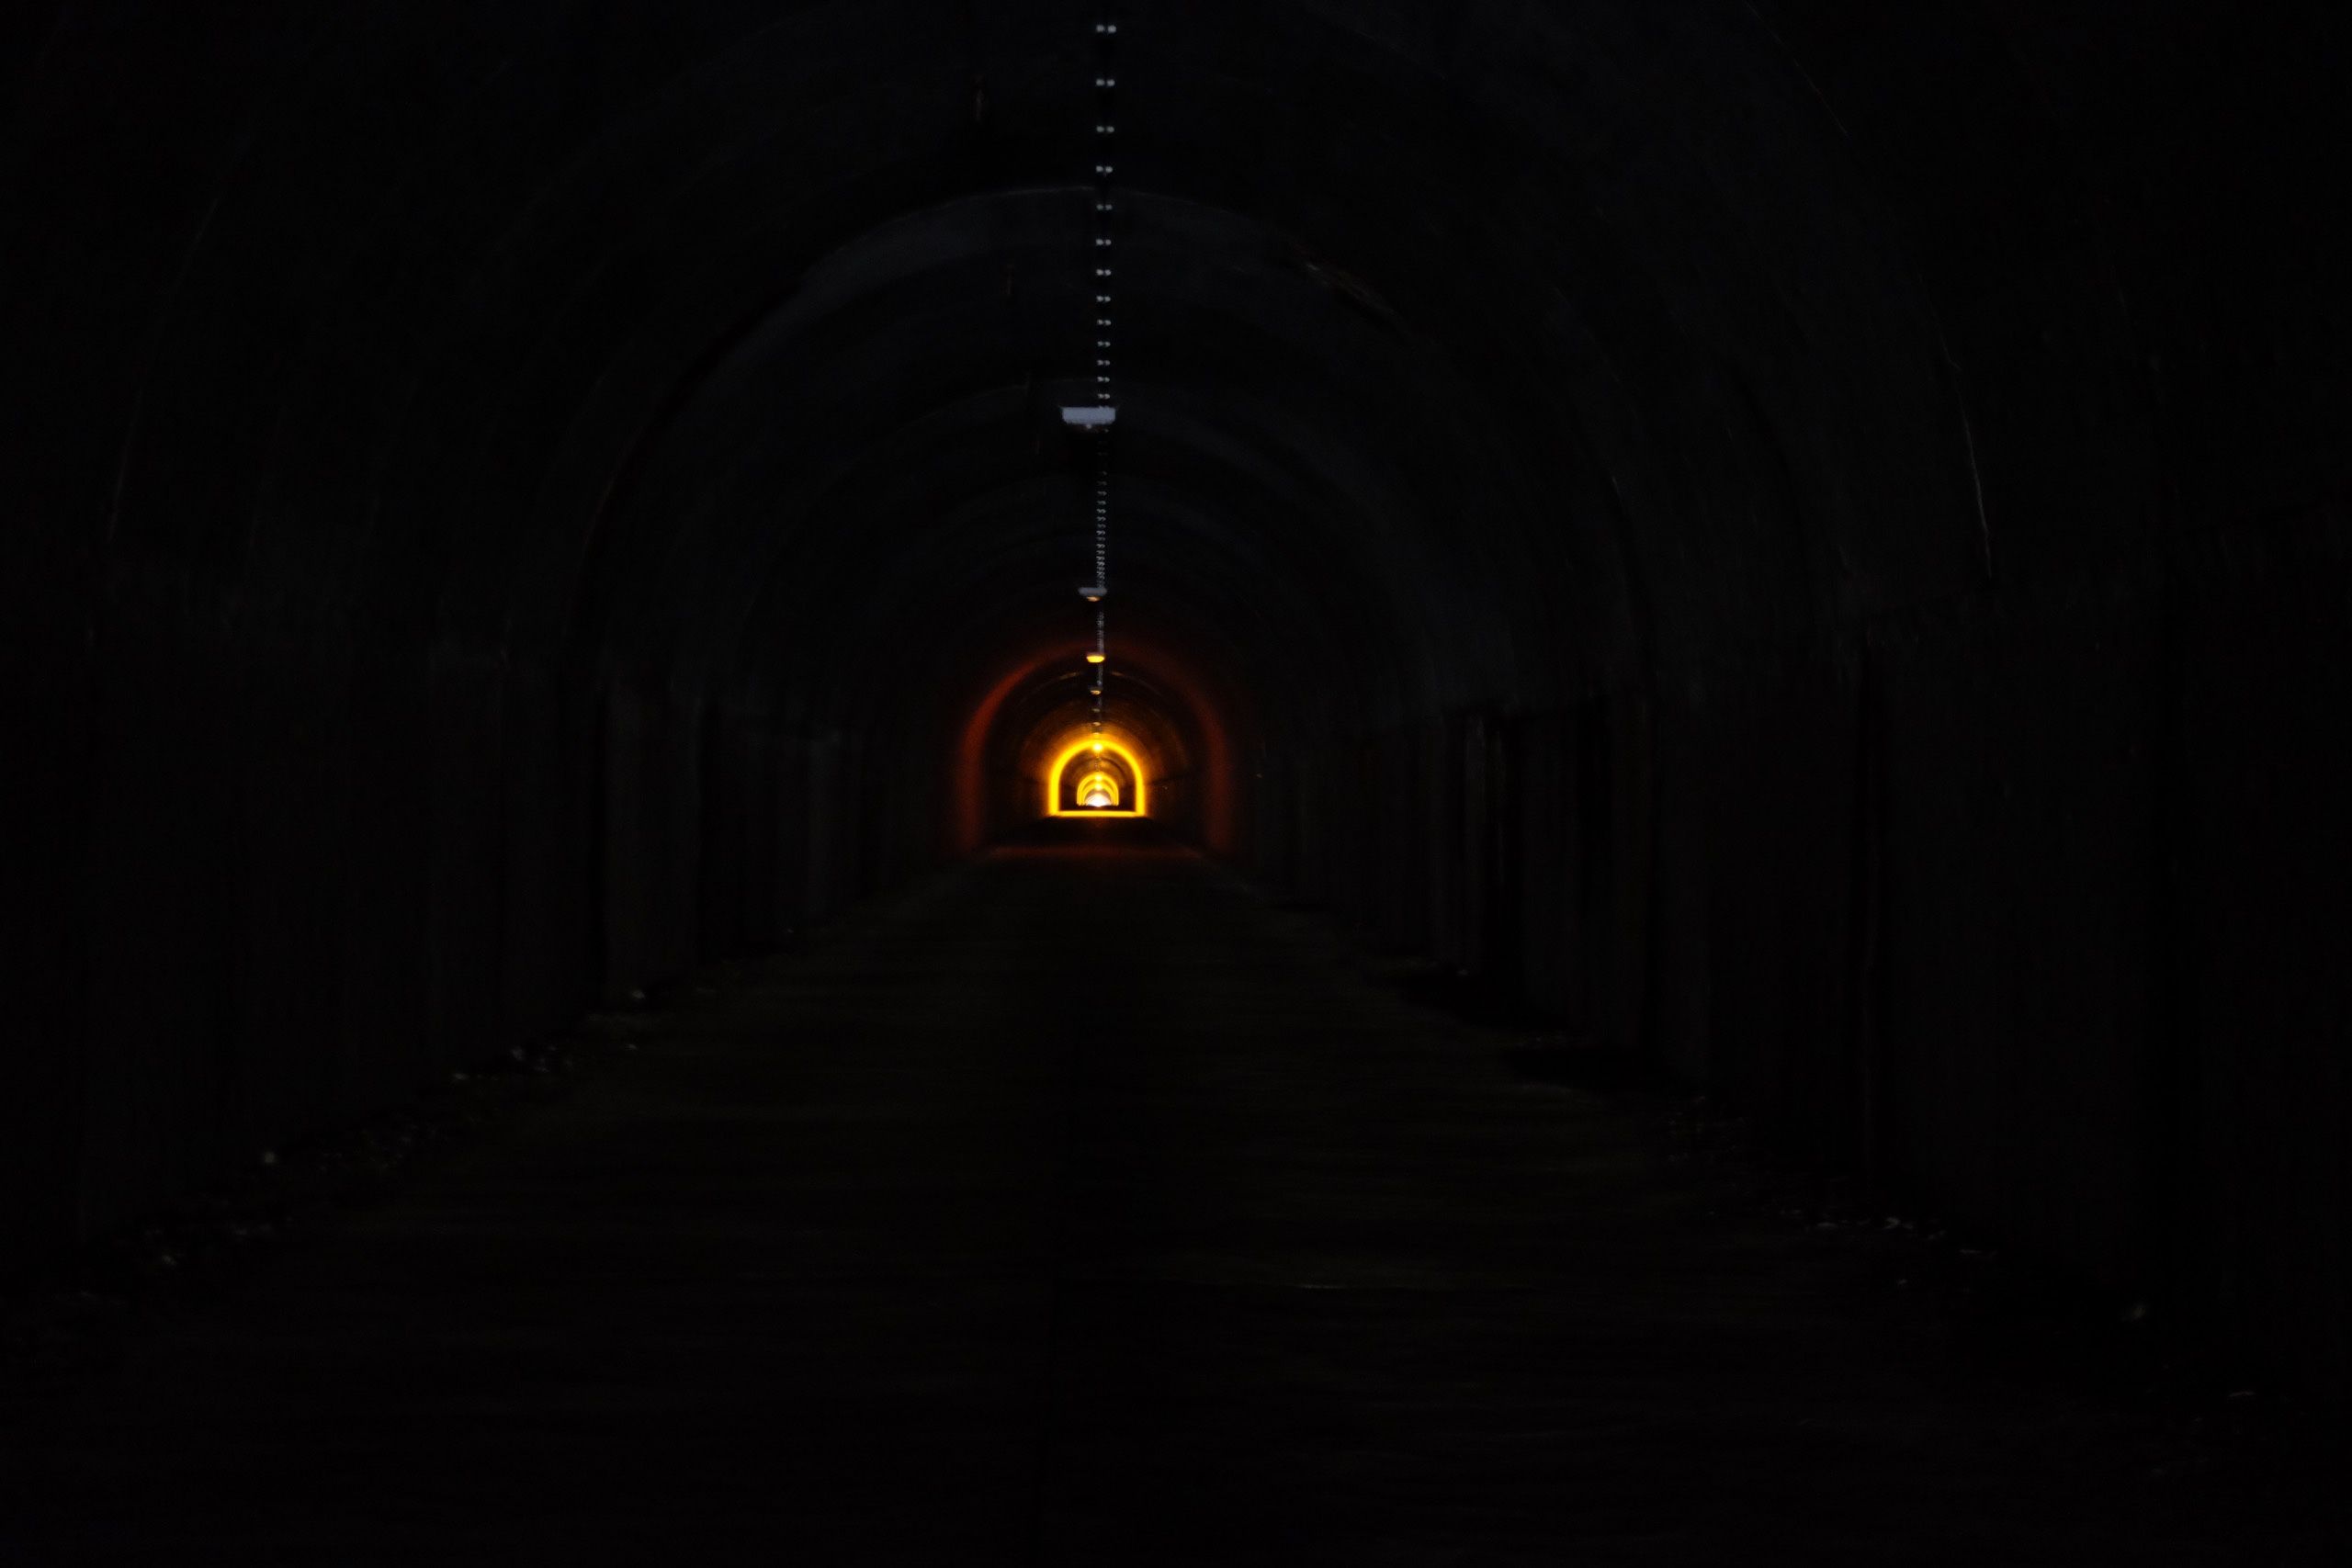 Looking along a pitch-black tunnel with some artificial lights in the distance.